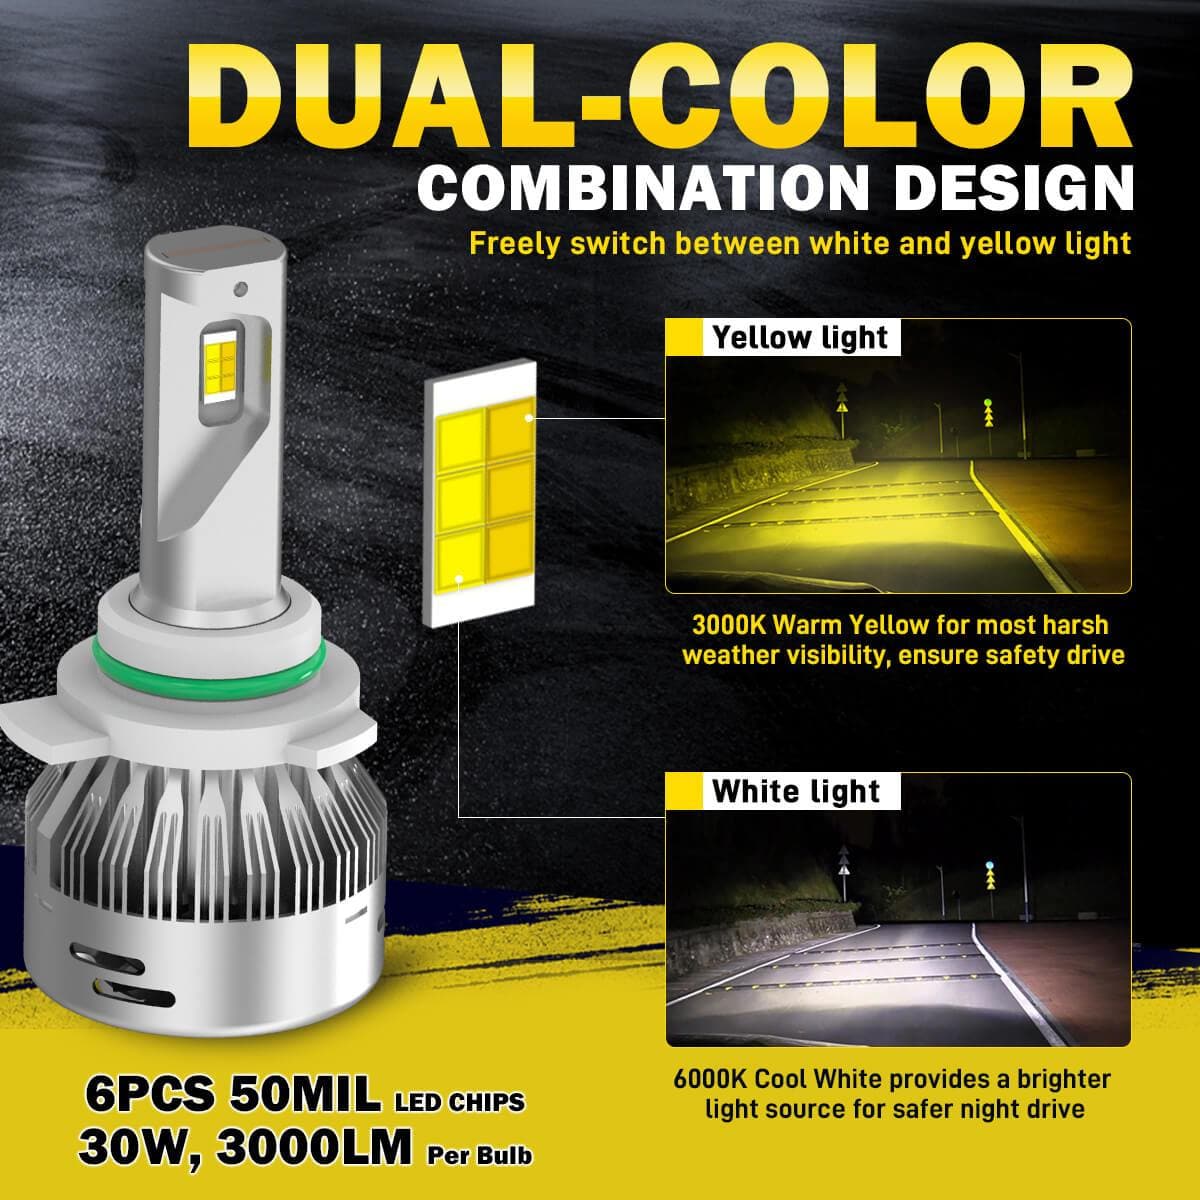 H4 Dual-Color LED Headlight Conversion Kit with Fog Light Function